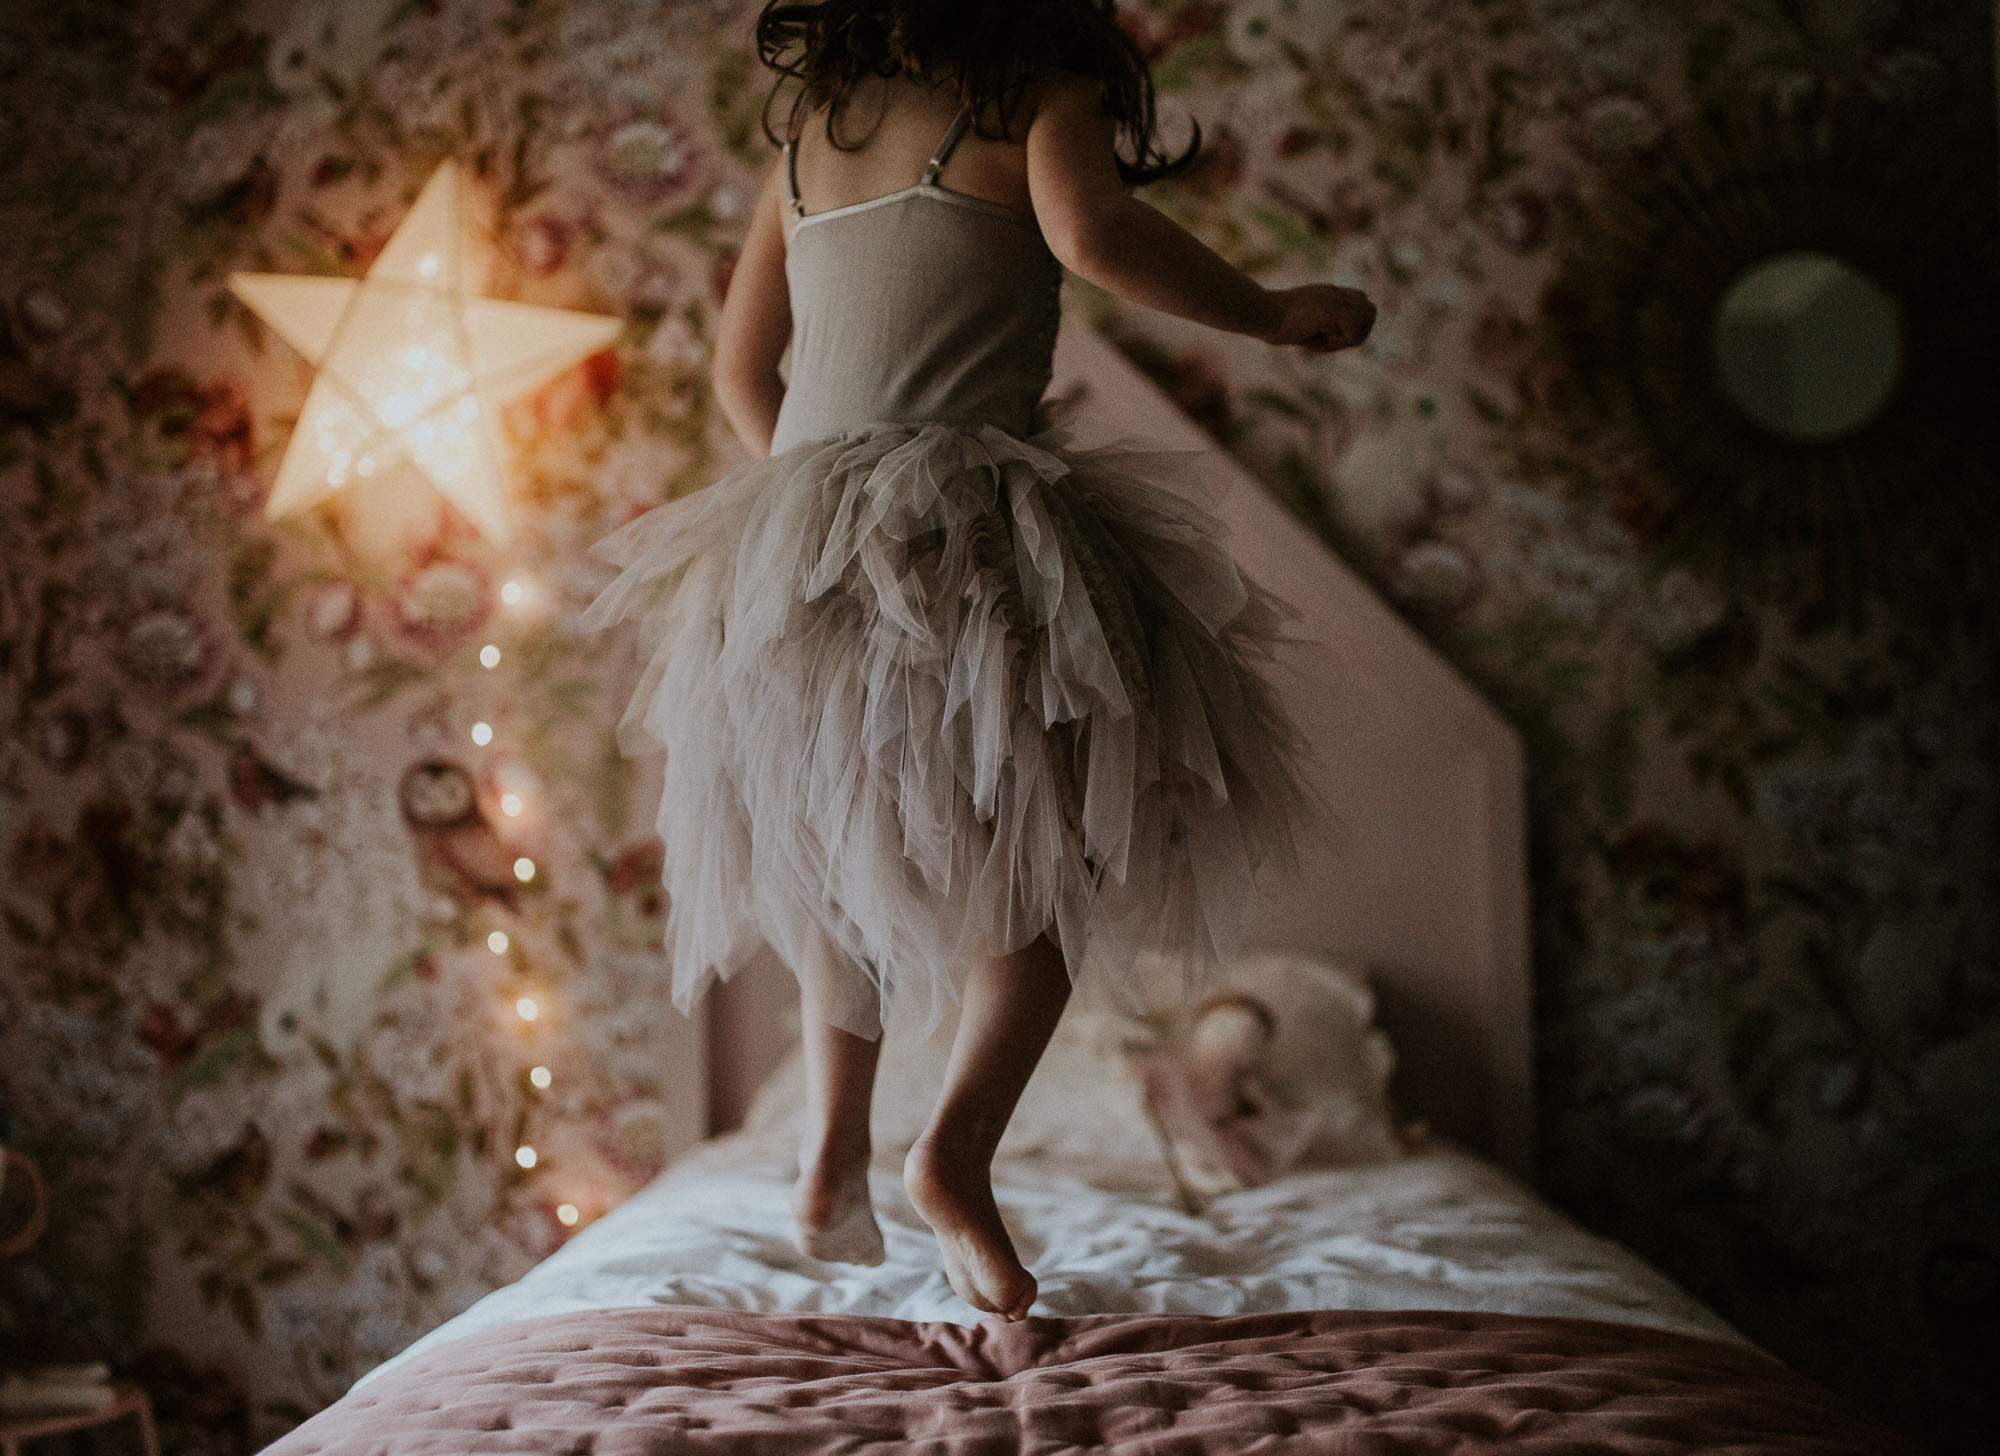 Jumping On The Bed | Family Photography Sydney